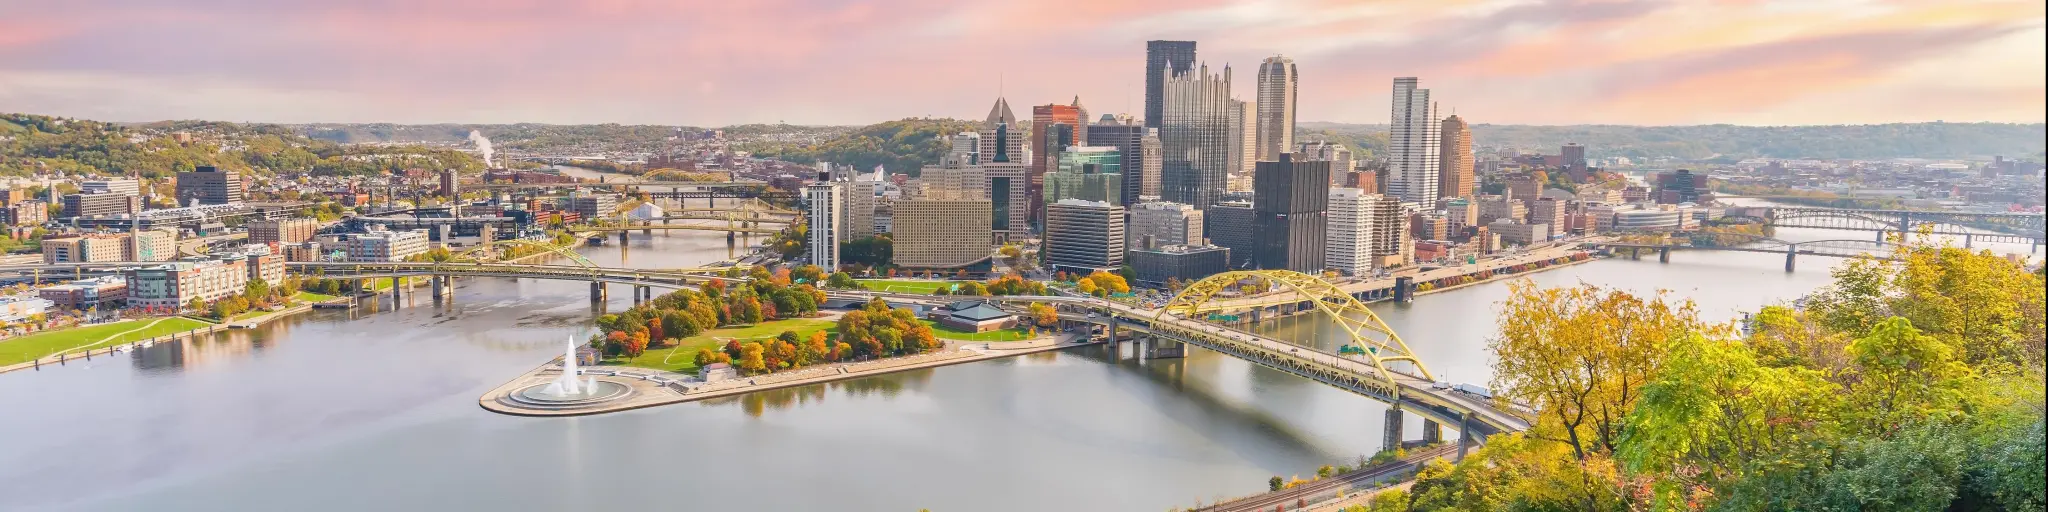 Pittsburgh, Pennsylvania at sunset with a view of a red mountain cart leading down to the city in the horizon and the river running through downtown.